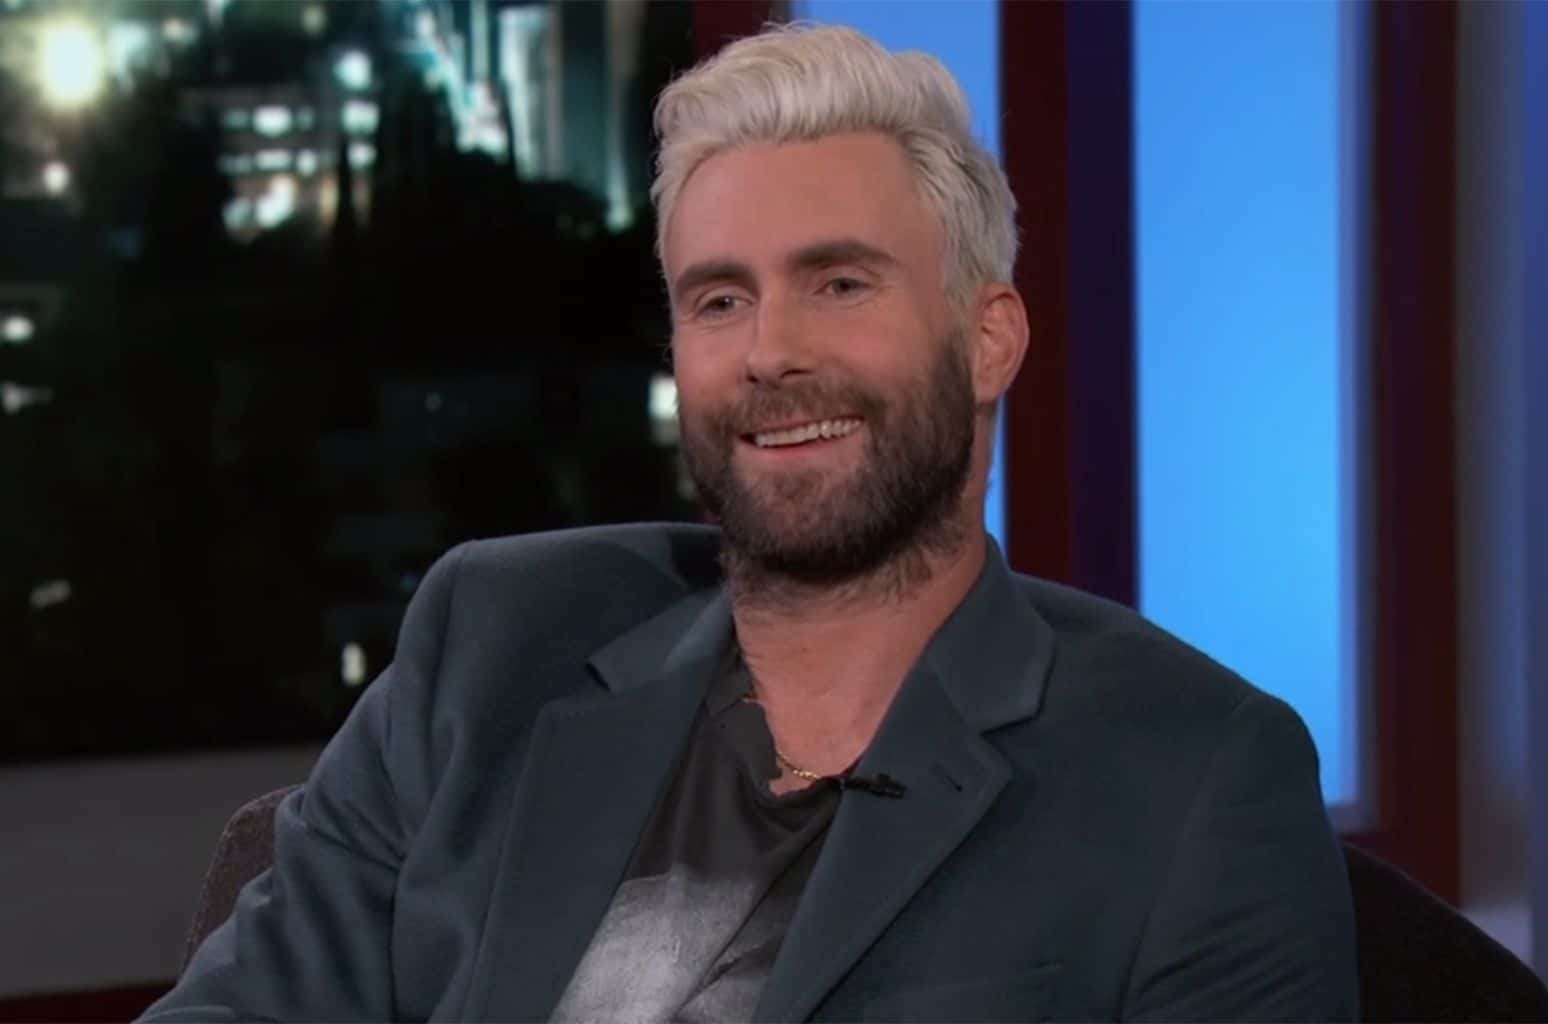 How To Achieve The Adam Levine Haircut In 3 Simple Steps